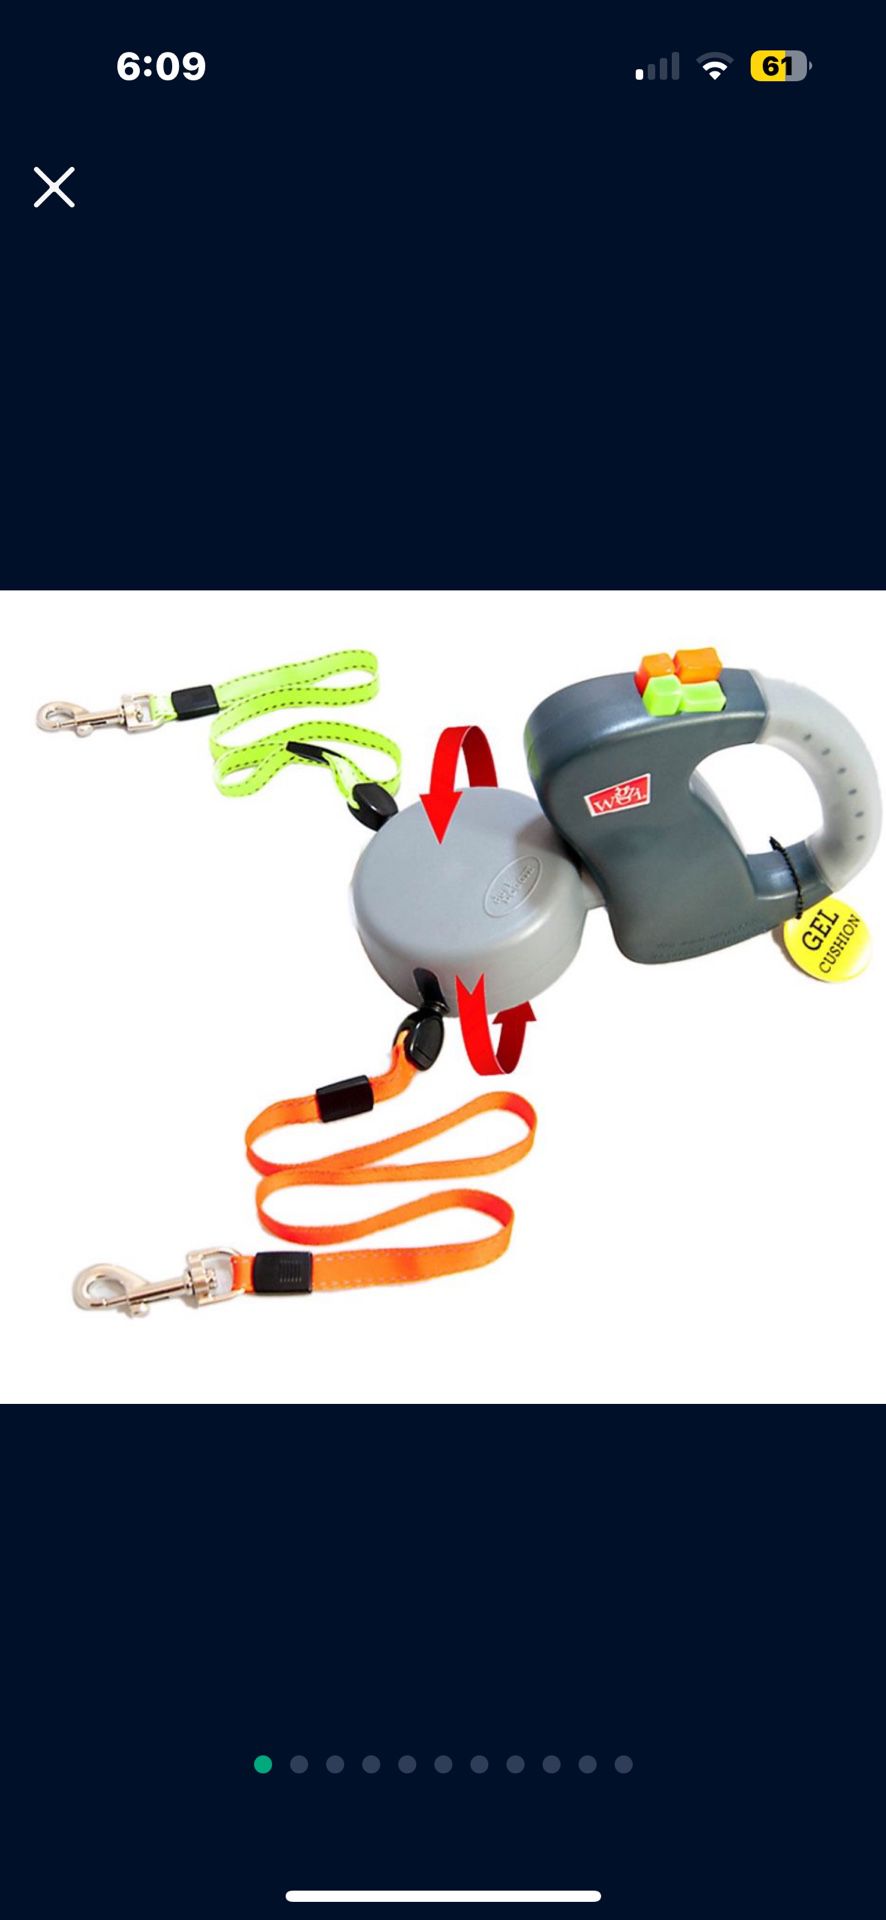 Brand New Retractable Double Dog Leash For 2 Dogs. Swivels ( Leashes Uncross Themselves ) $18 OBO !!!ACCEPTING OFFERS!!!